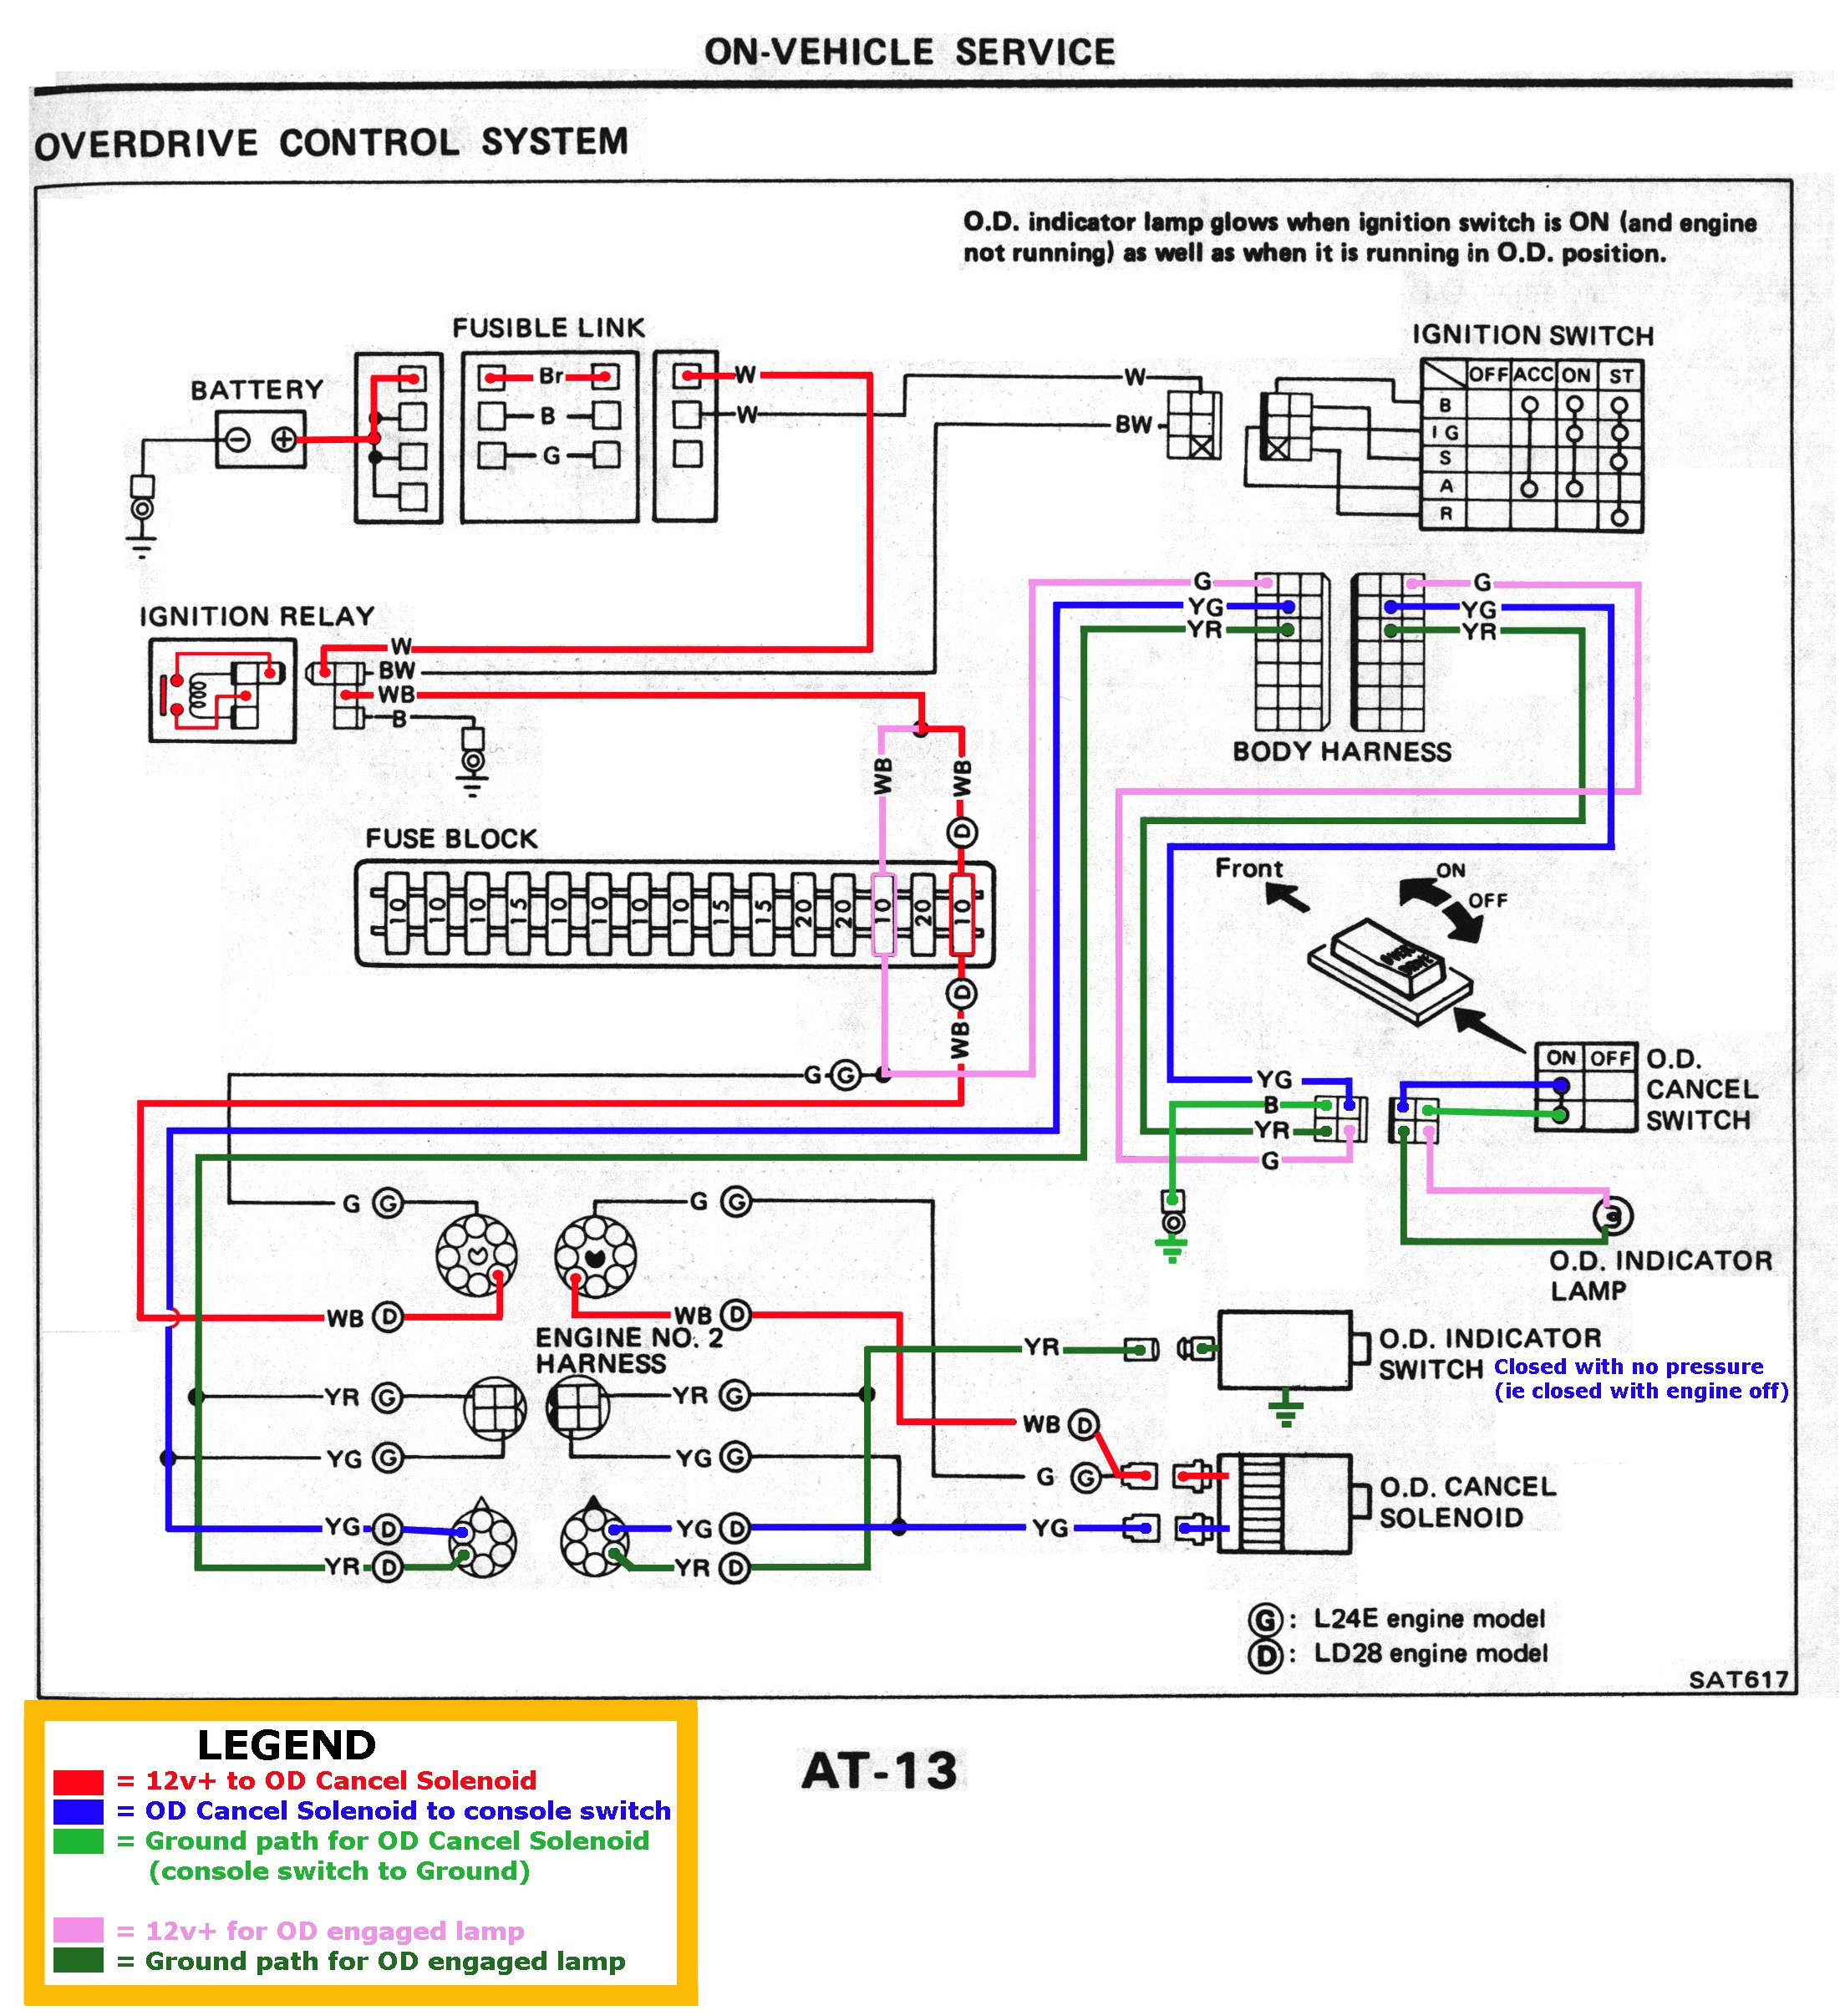 wiring diagram for 97 chevy cavalier free download wiring diagram 220 volt wiring diagram for gei 56110 motor